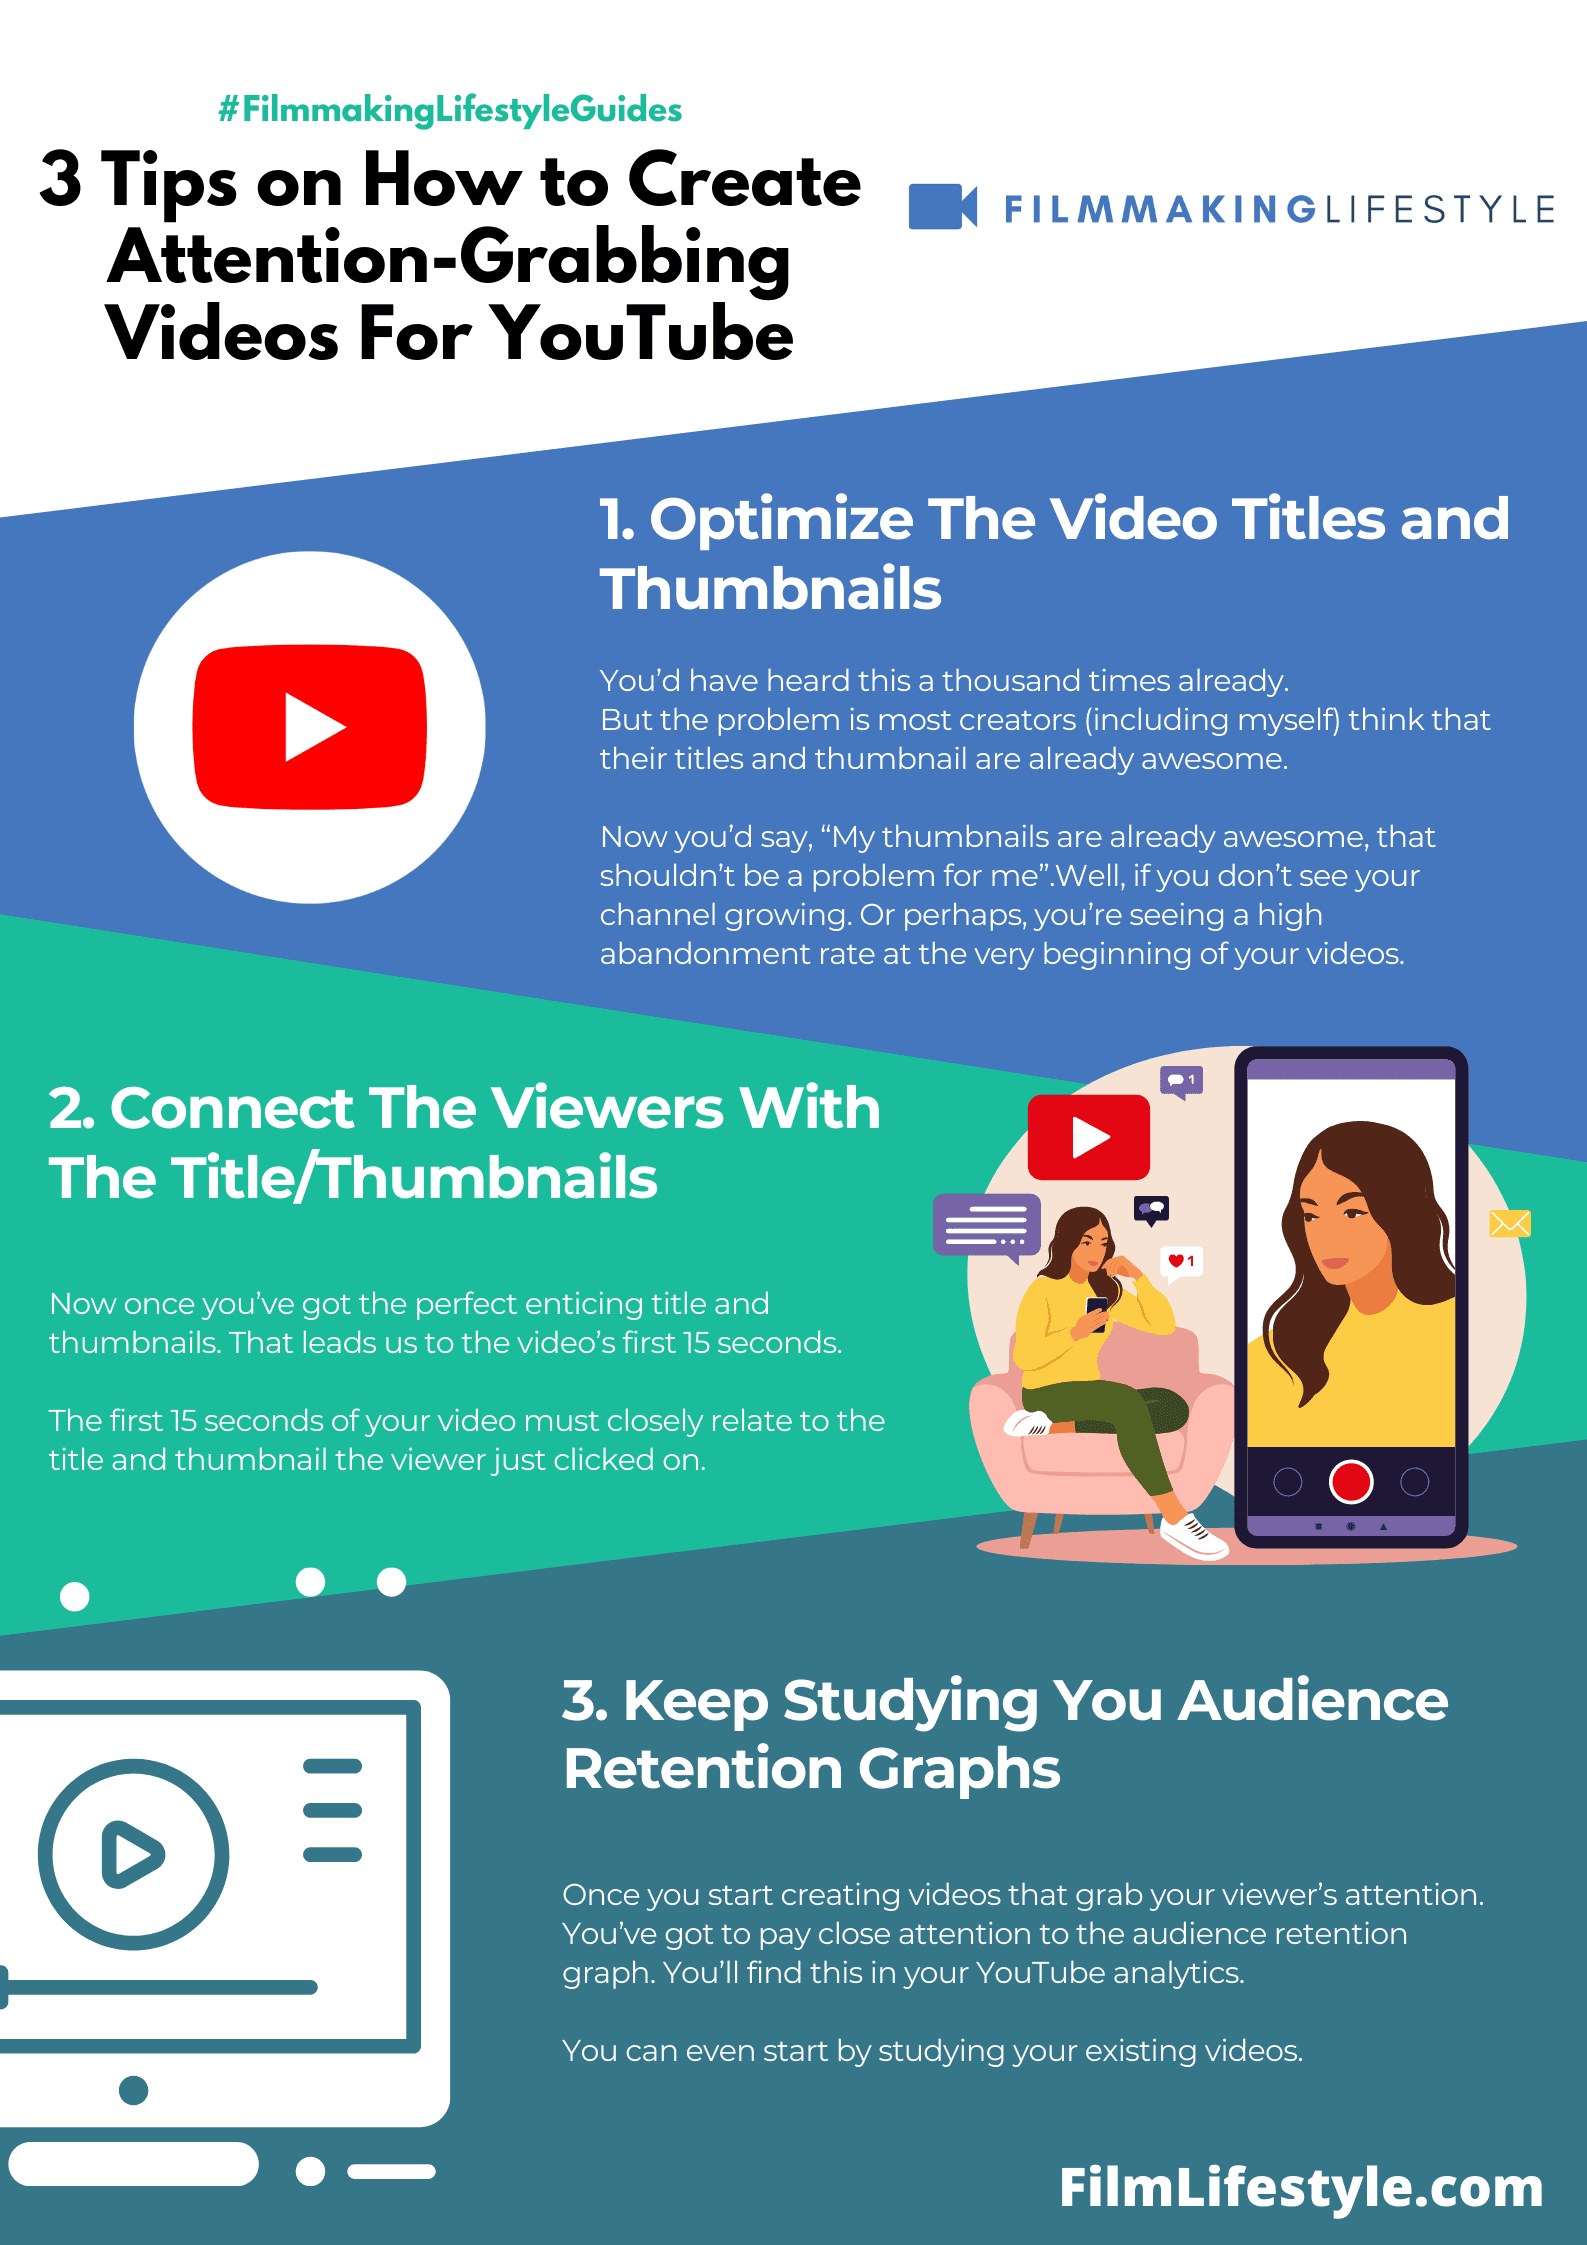 How to Create Attention-Grabbing Videos For YouTube